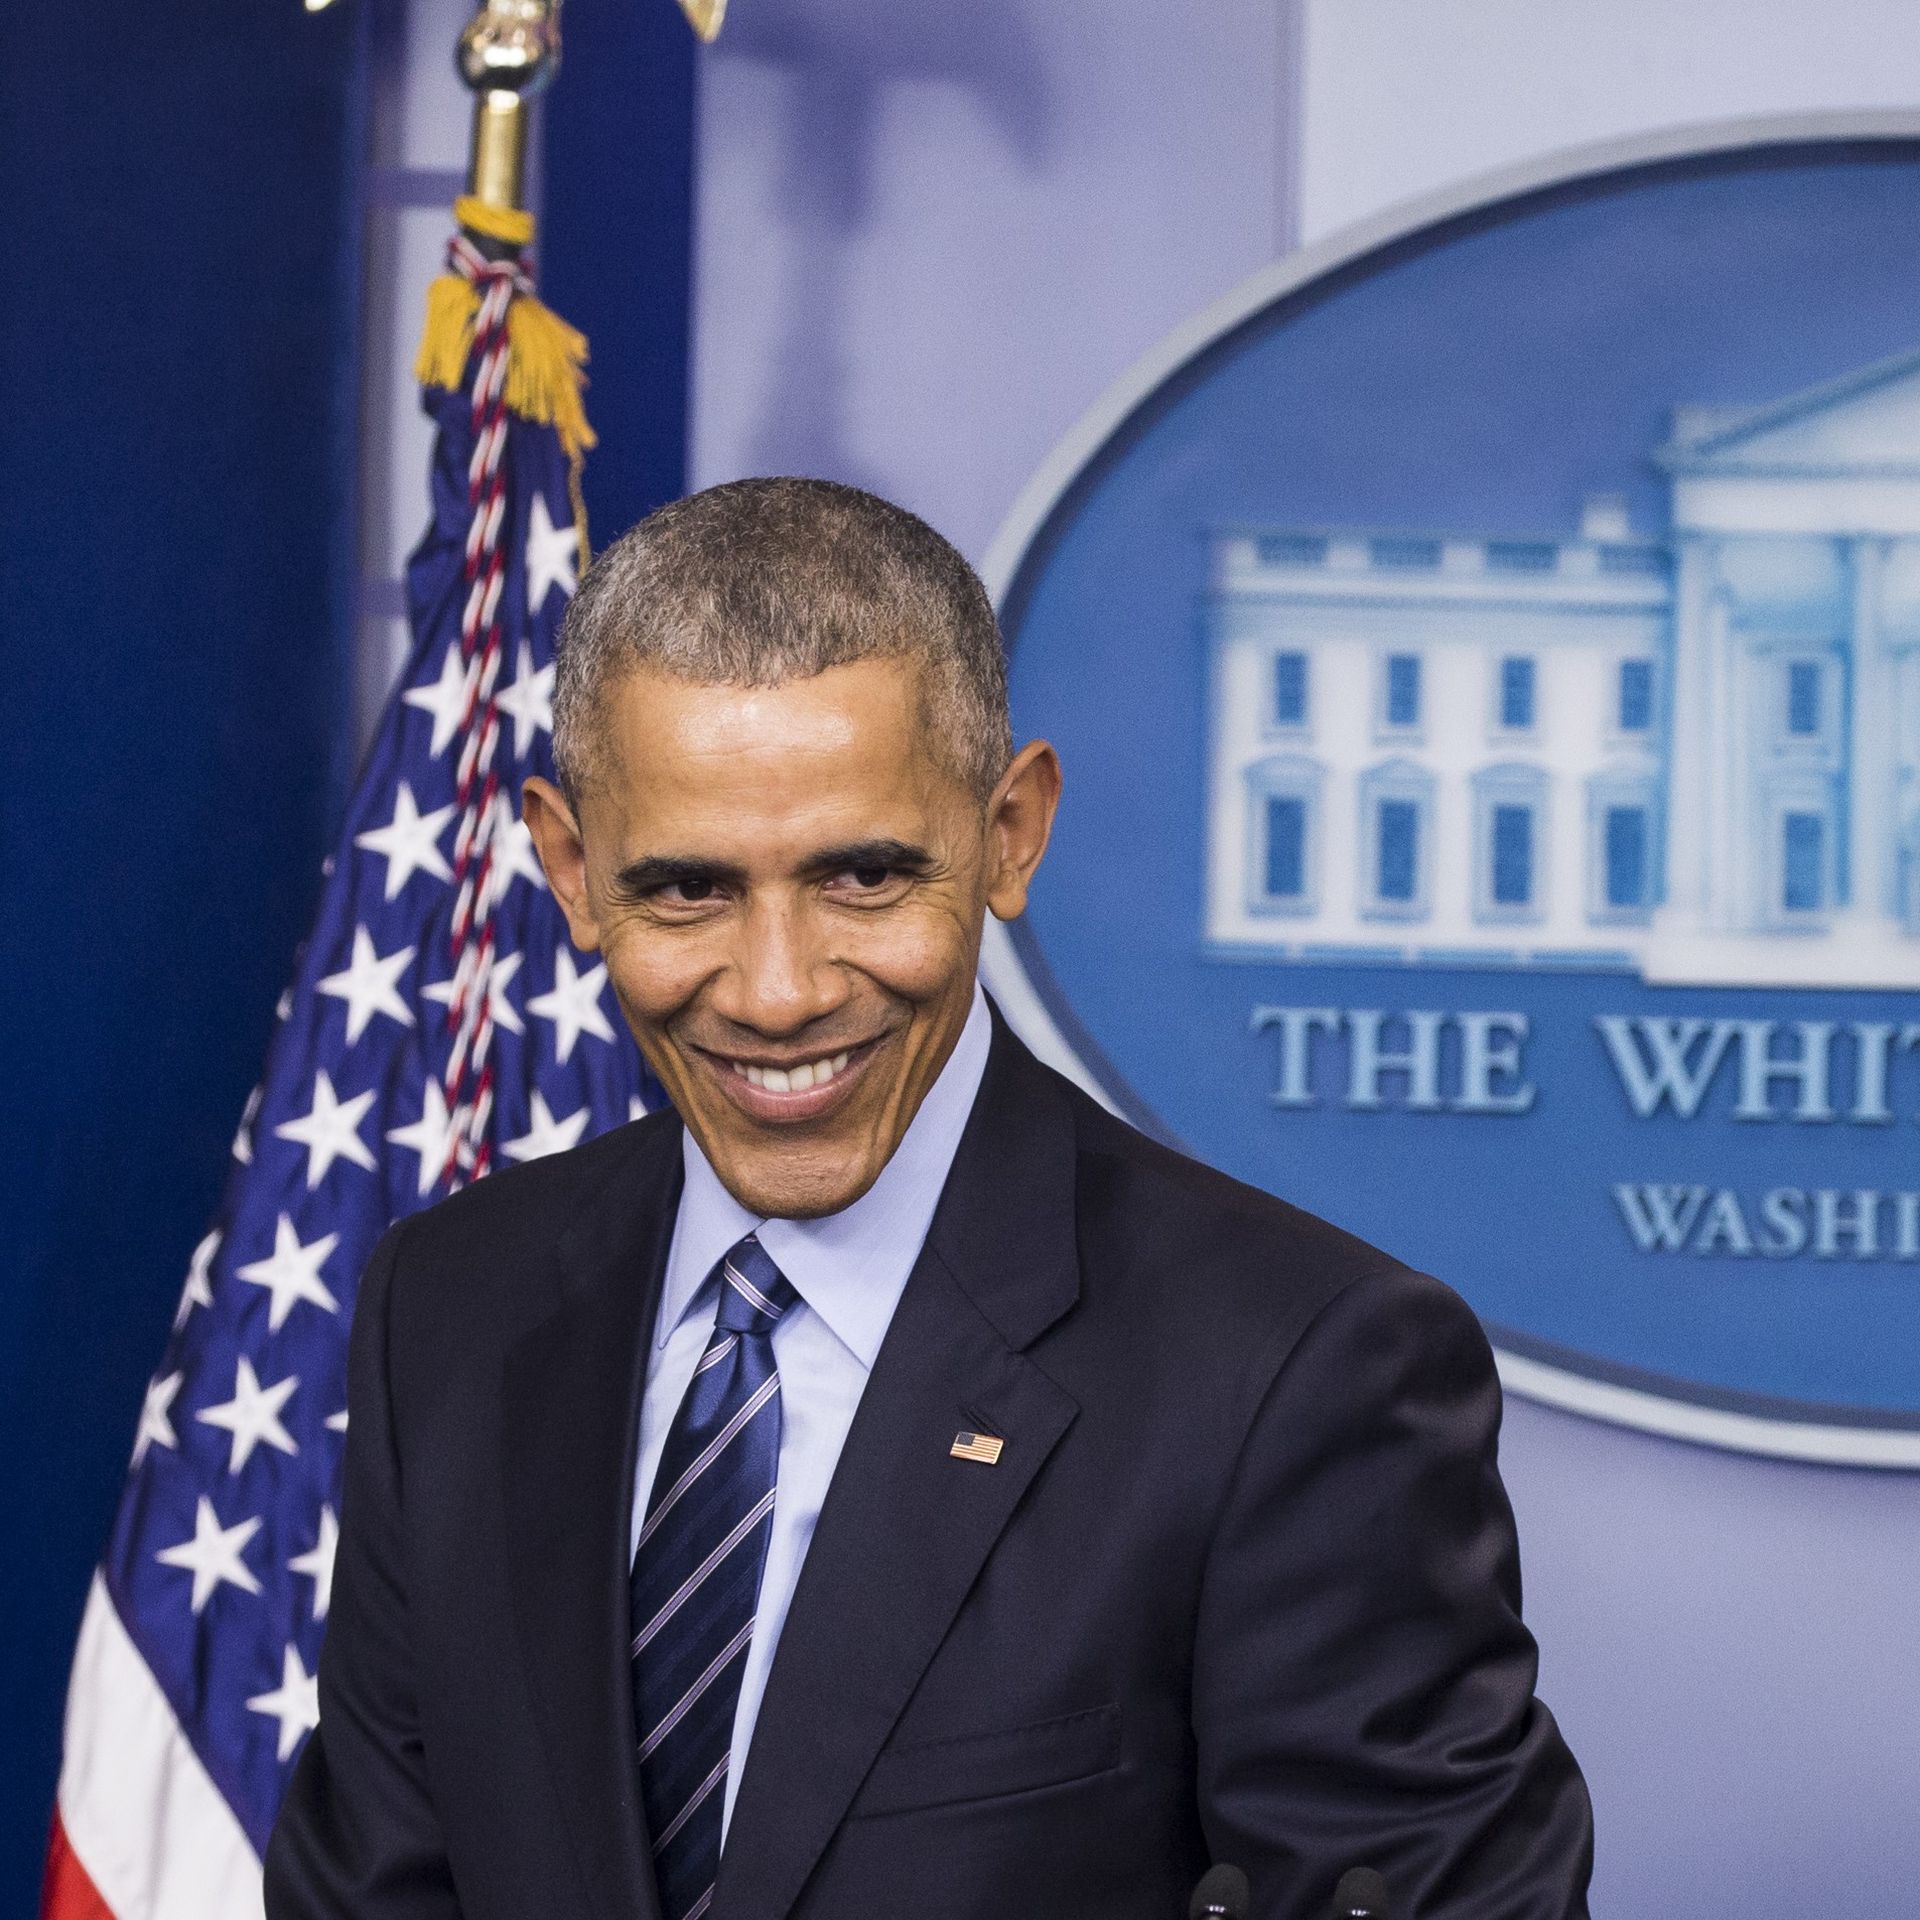 Then-President Obama, smiling, in the White House briefing room.